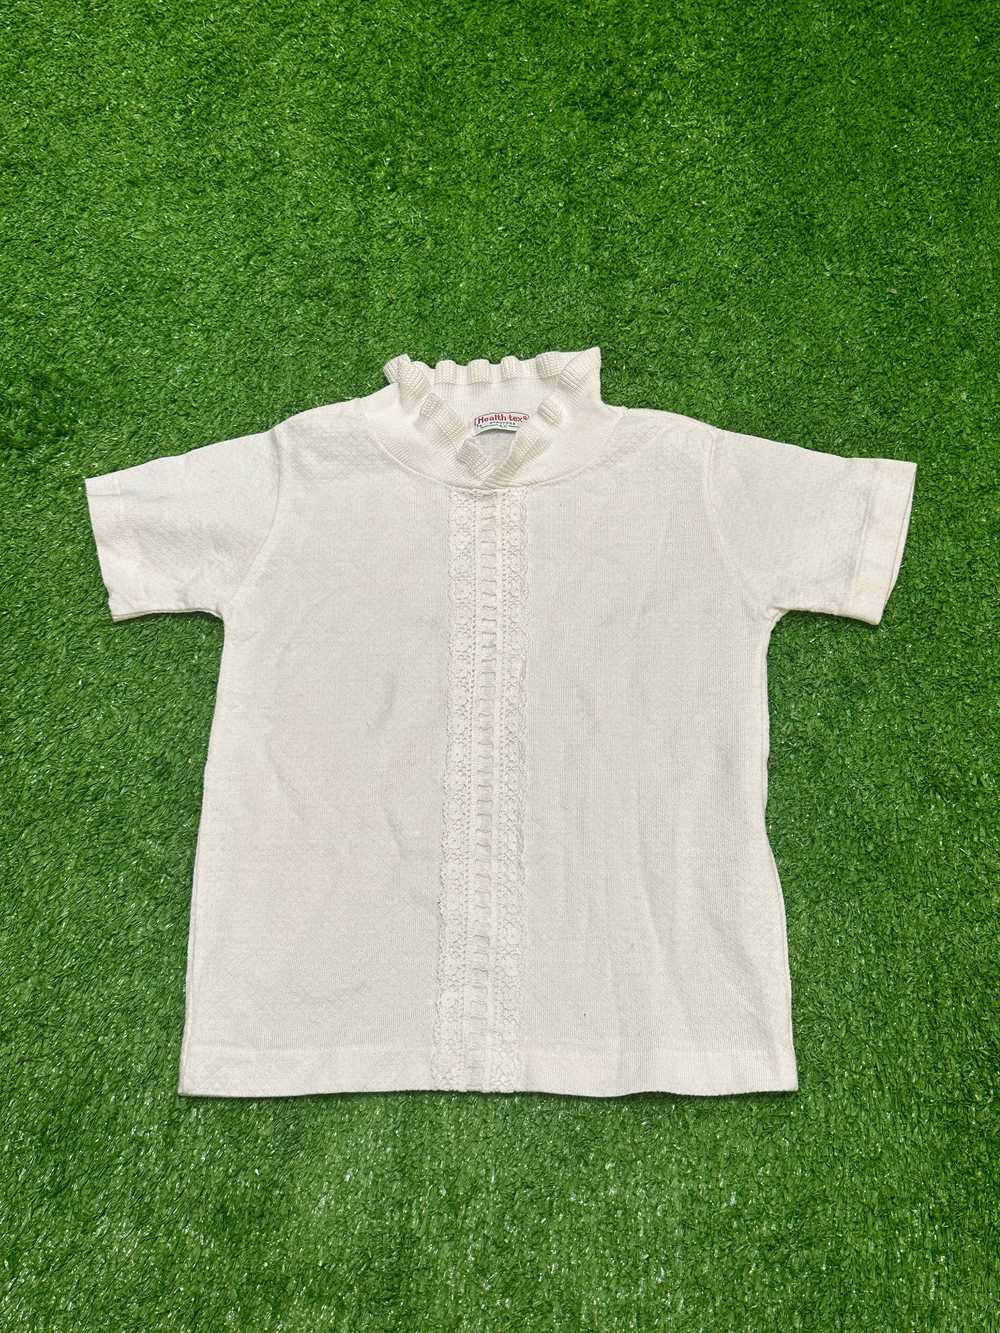 Health-Tex Stantogs Lace Tee Youth Size 6x (6.5) - image 2